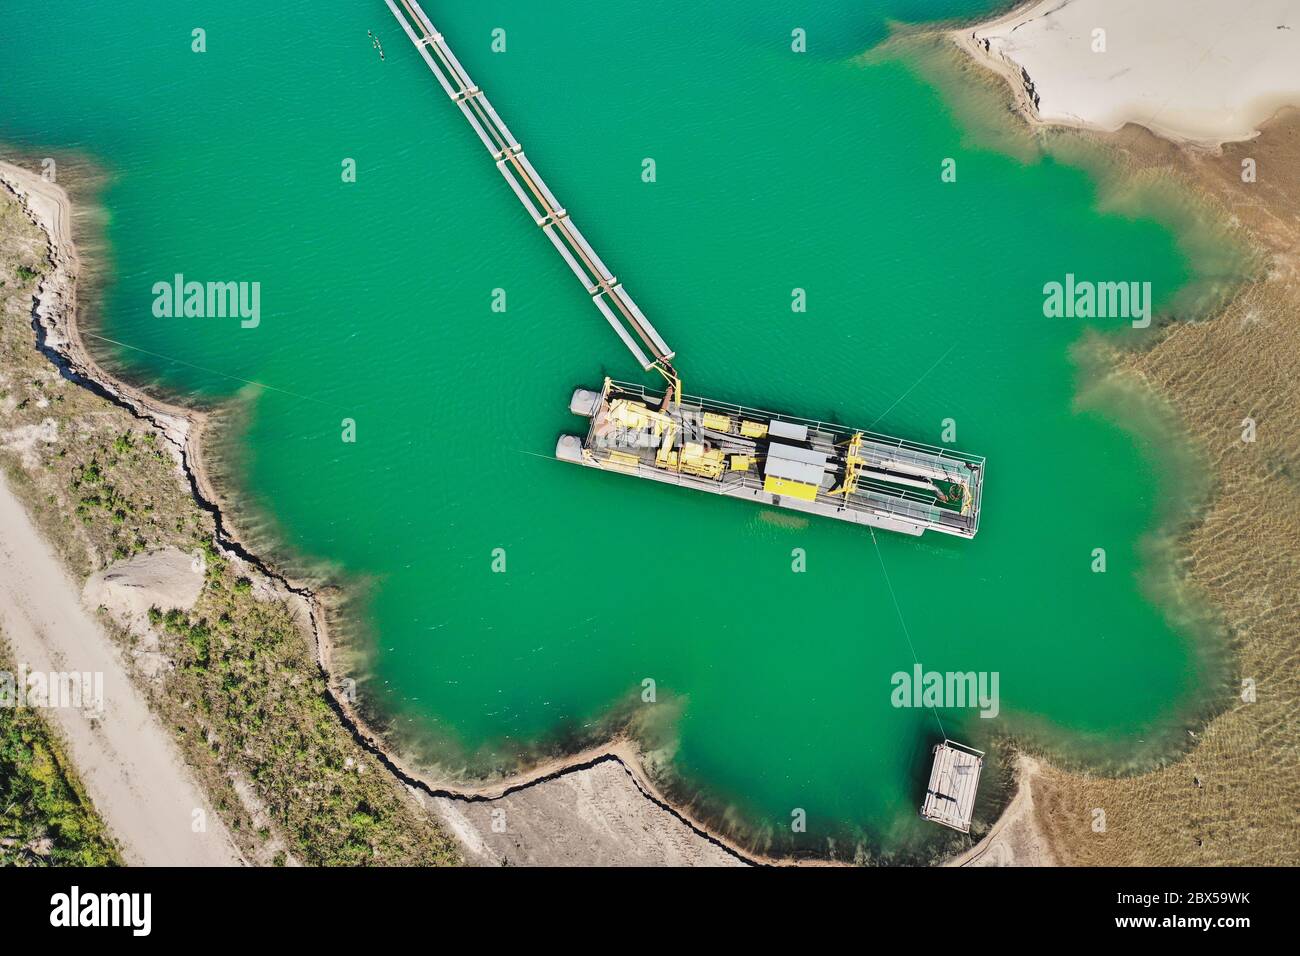 Vertical aerial photograph of a suction dredger in a wet mining area for sand and gravel, with connected pipeline to remove the sand Stock Photo